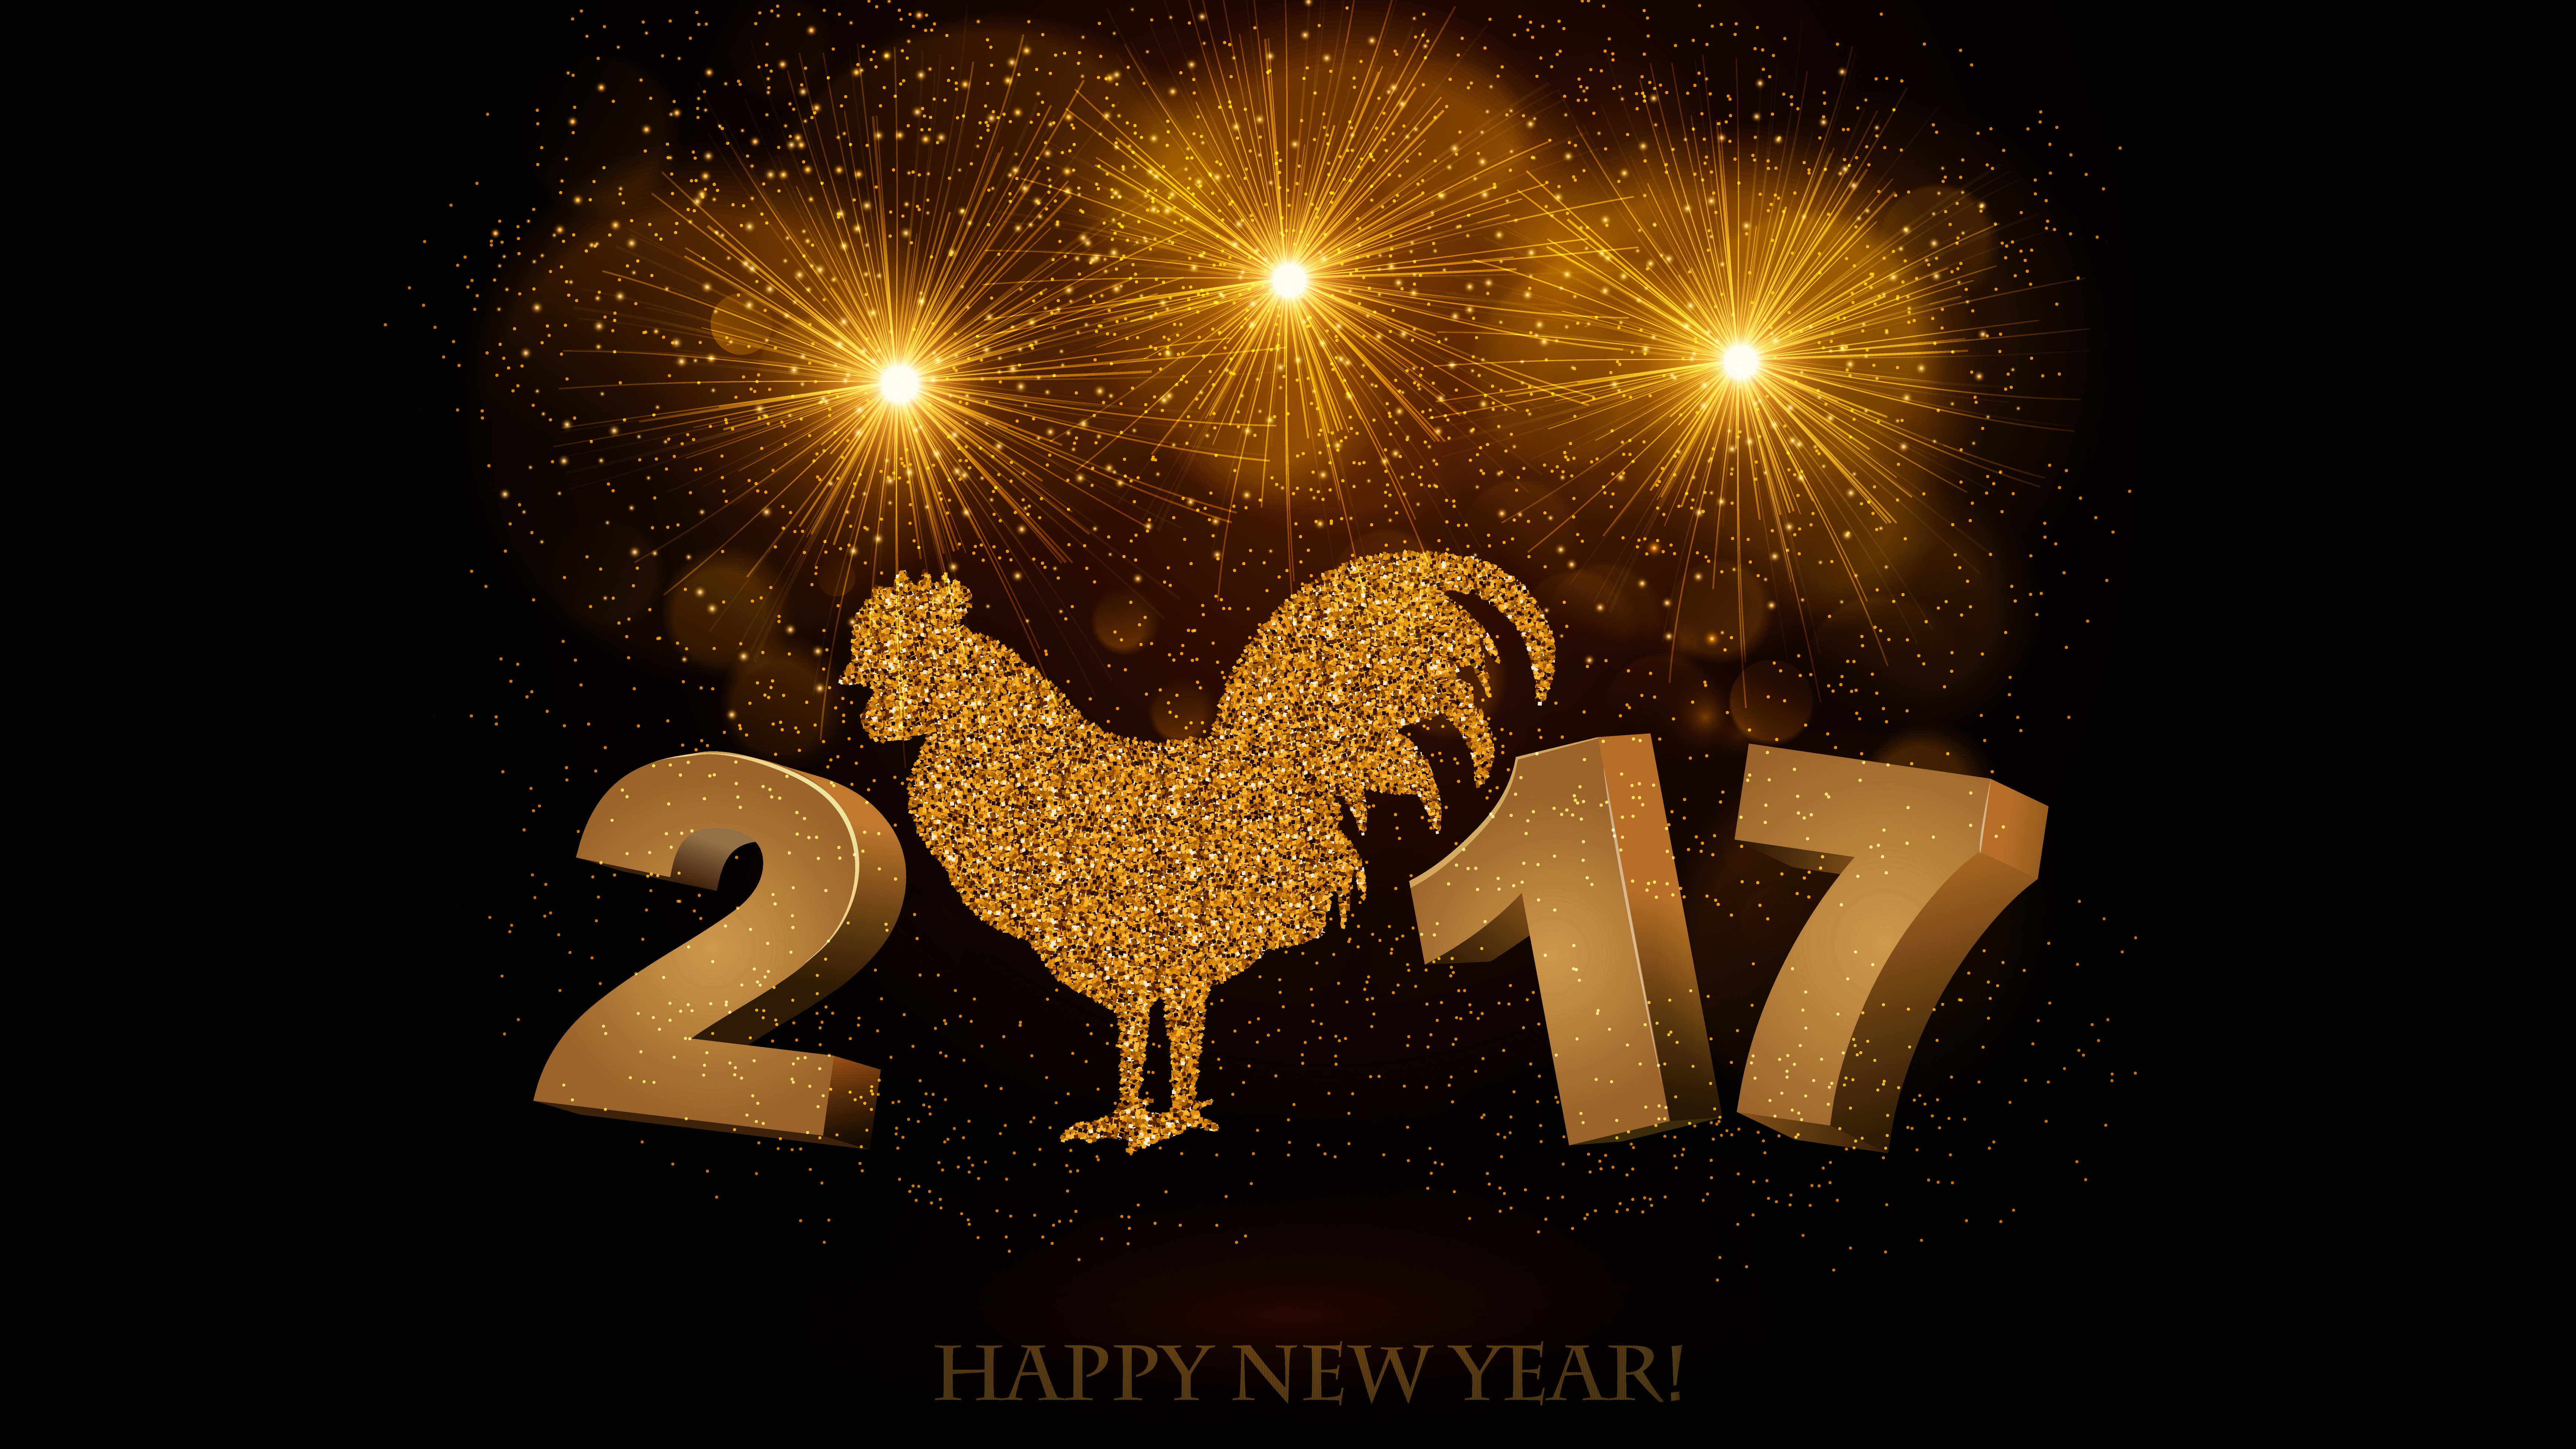 New Year New Year 2017 6952x3911